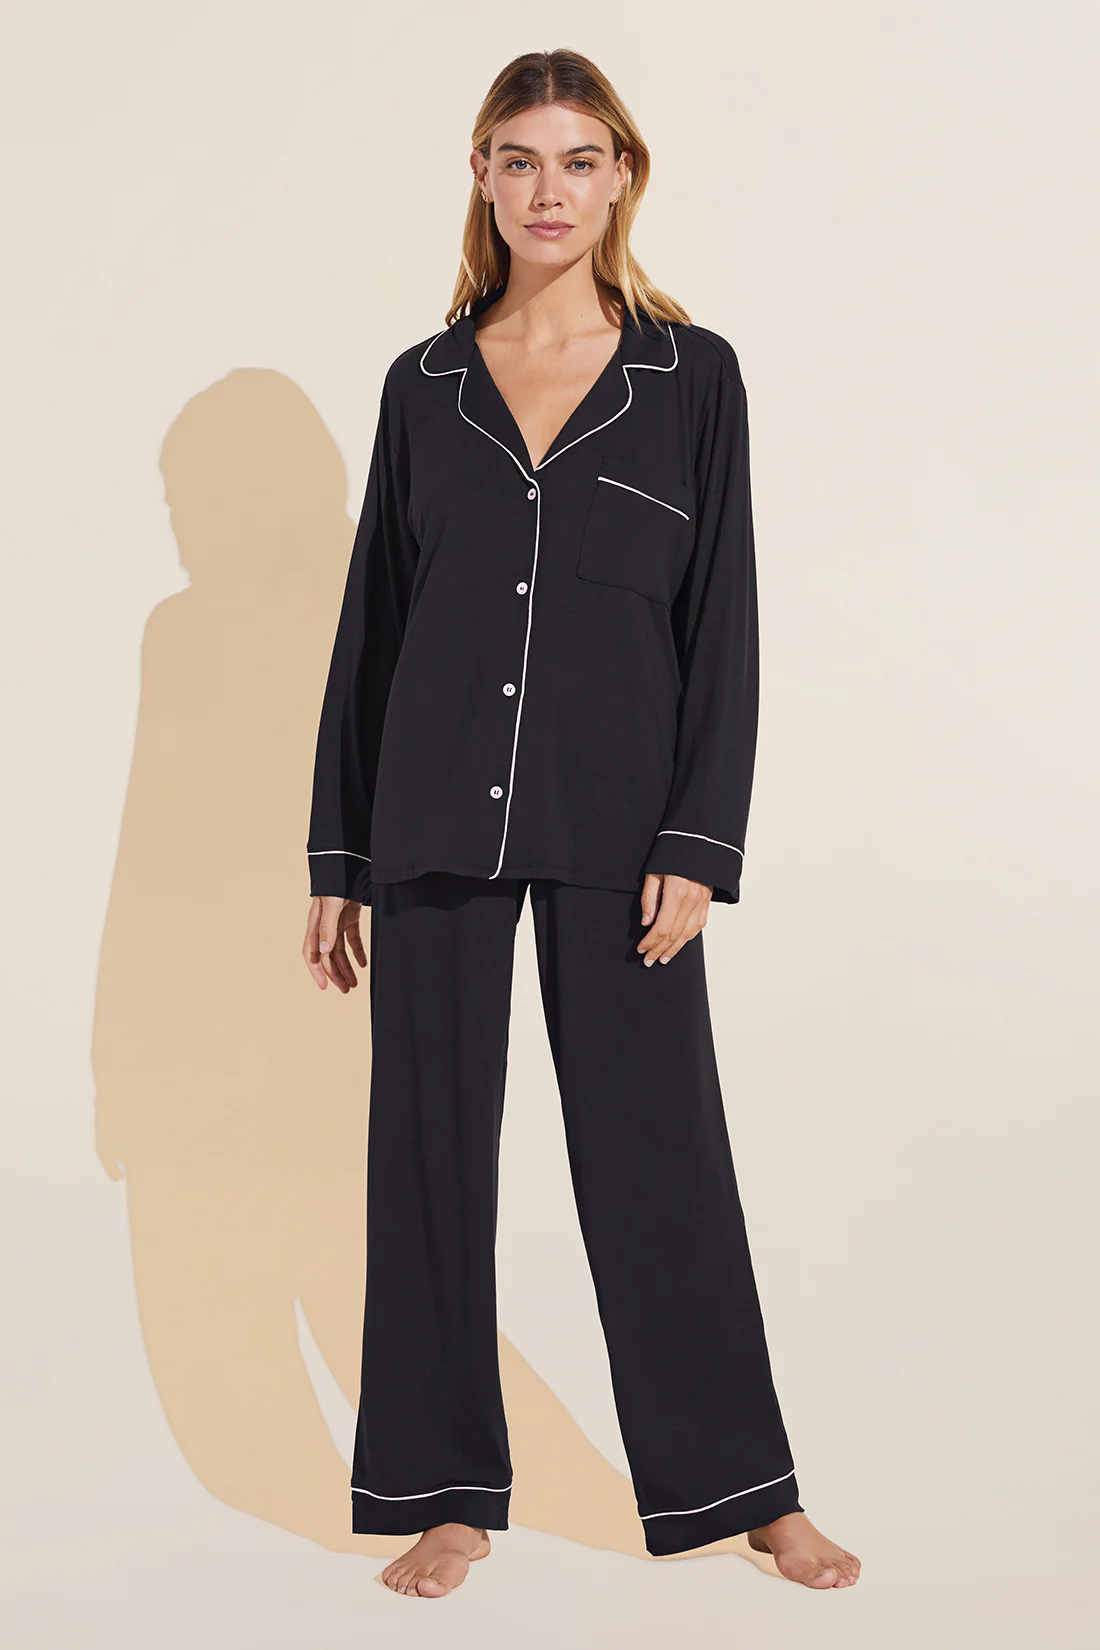 11 Of The Best Pyjama Sets and Separates To Get Cozy In This Winter